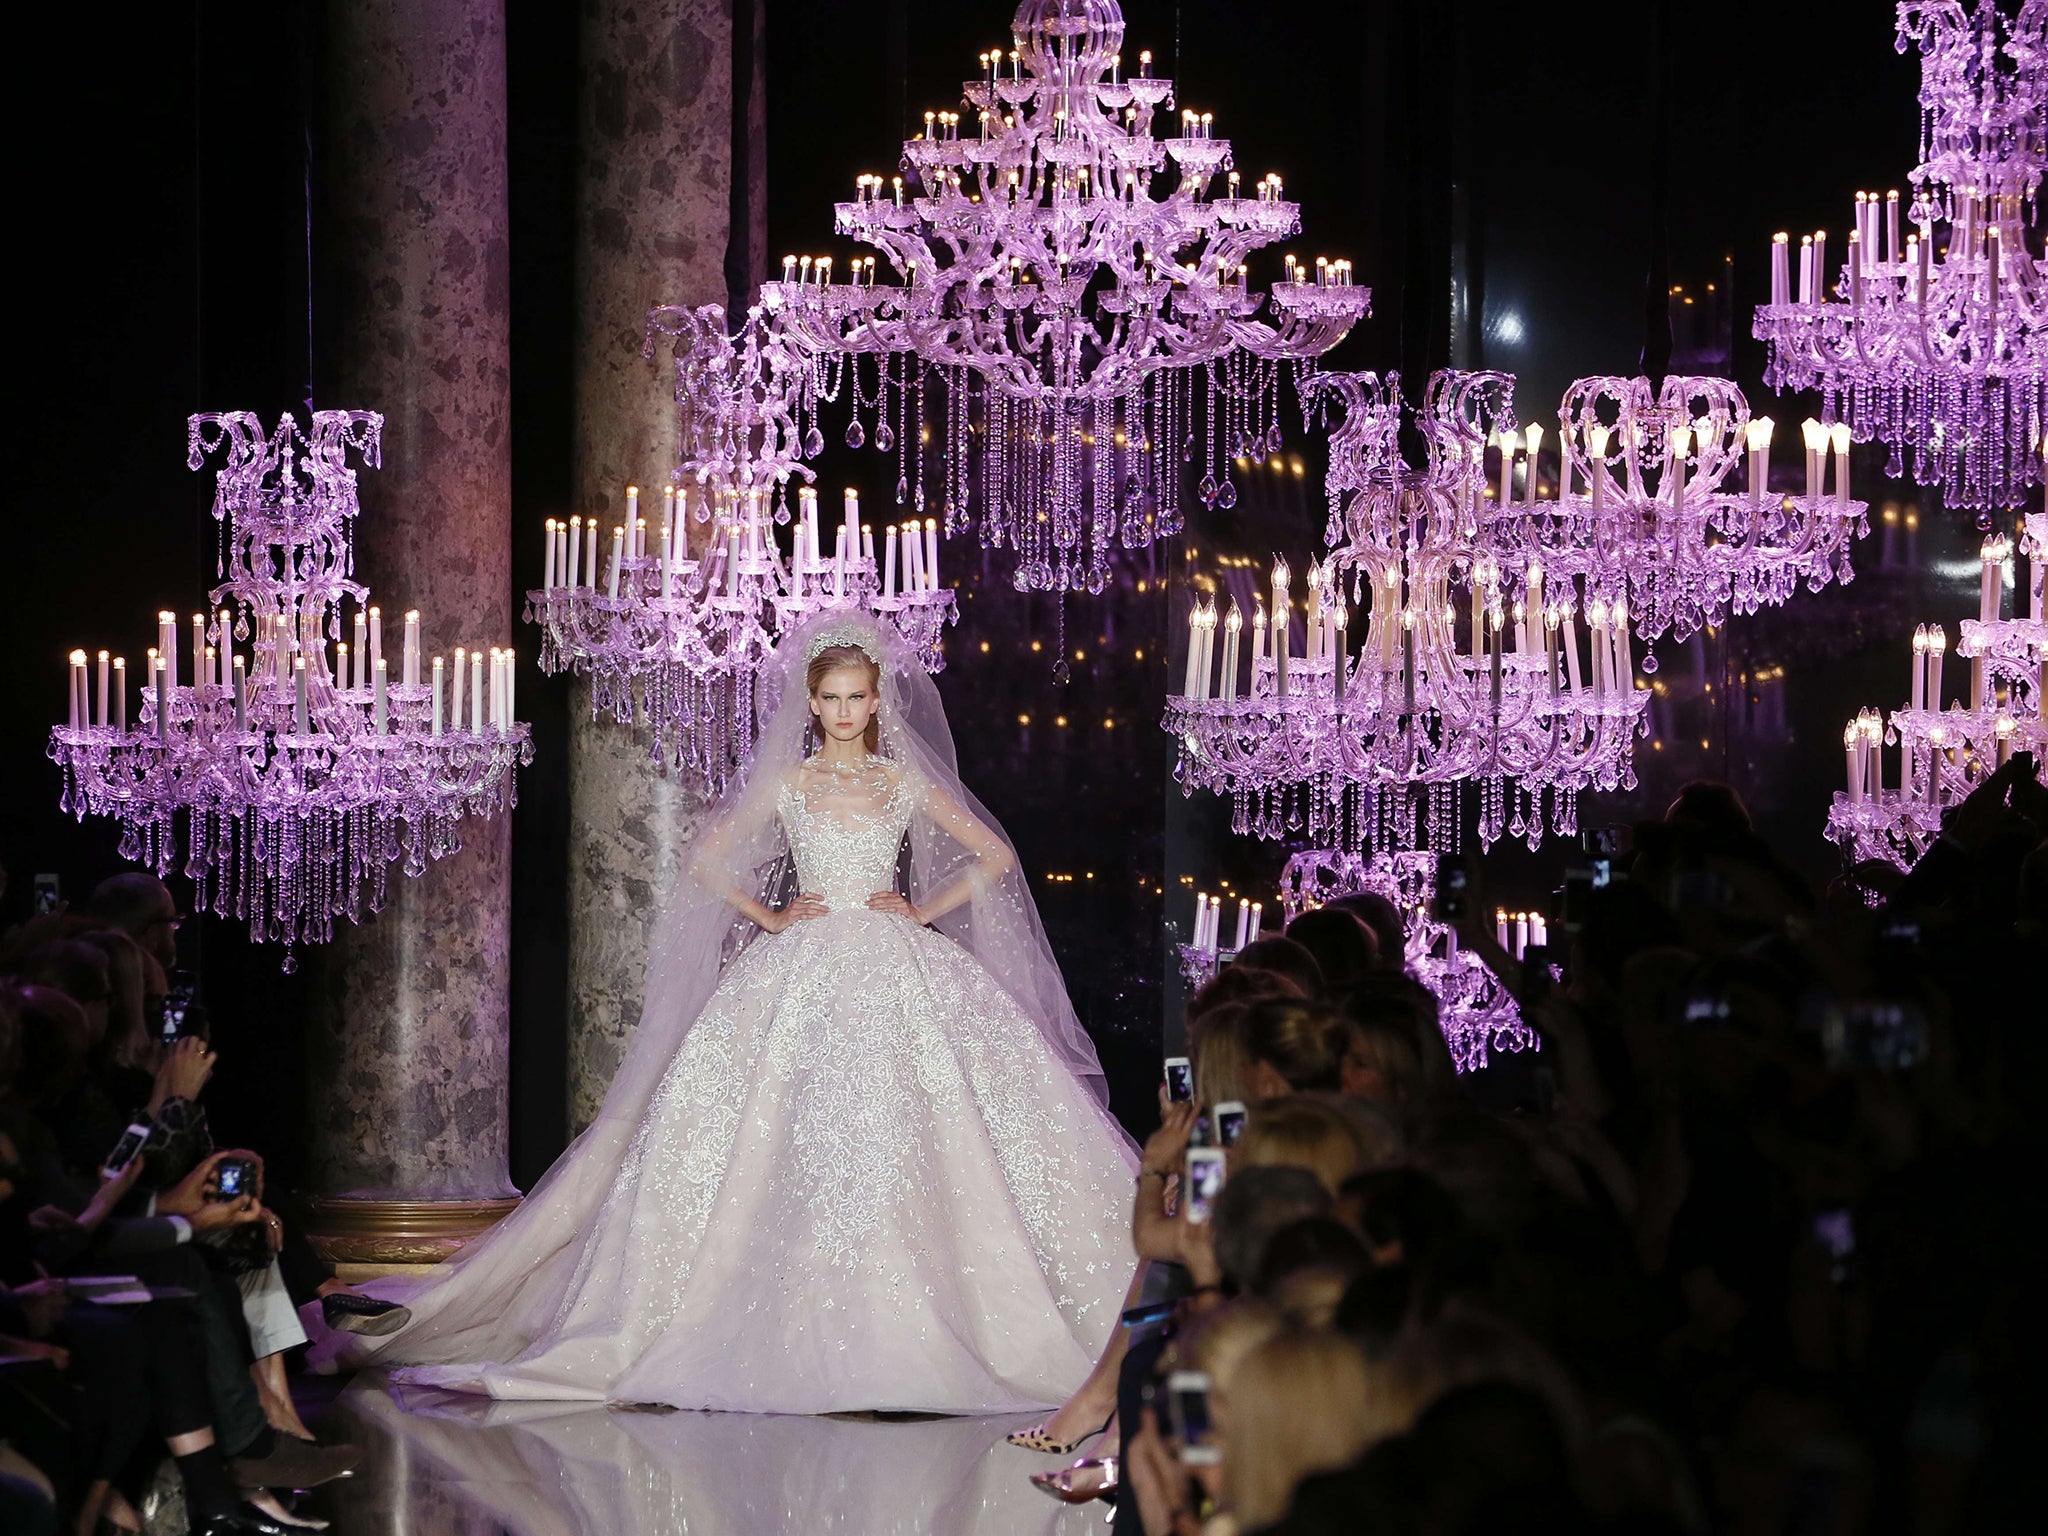 A model presents a creation by Elie Saab during the 2014/2015 Haute Couture Fall-Winter collection fashion show in Paris